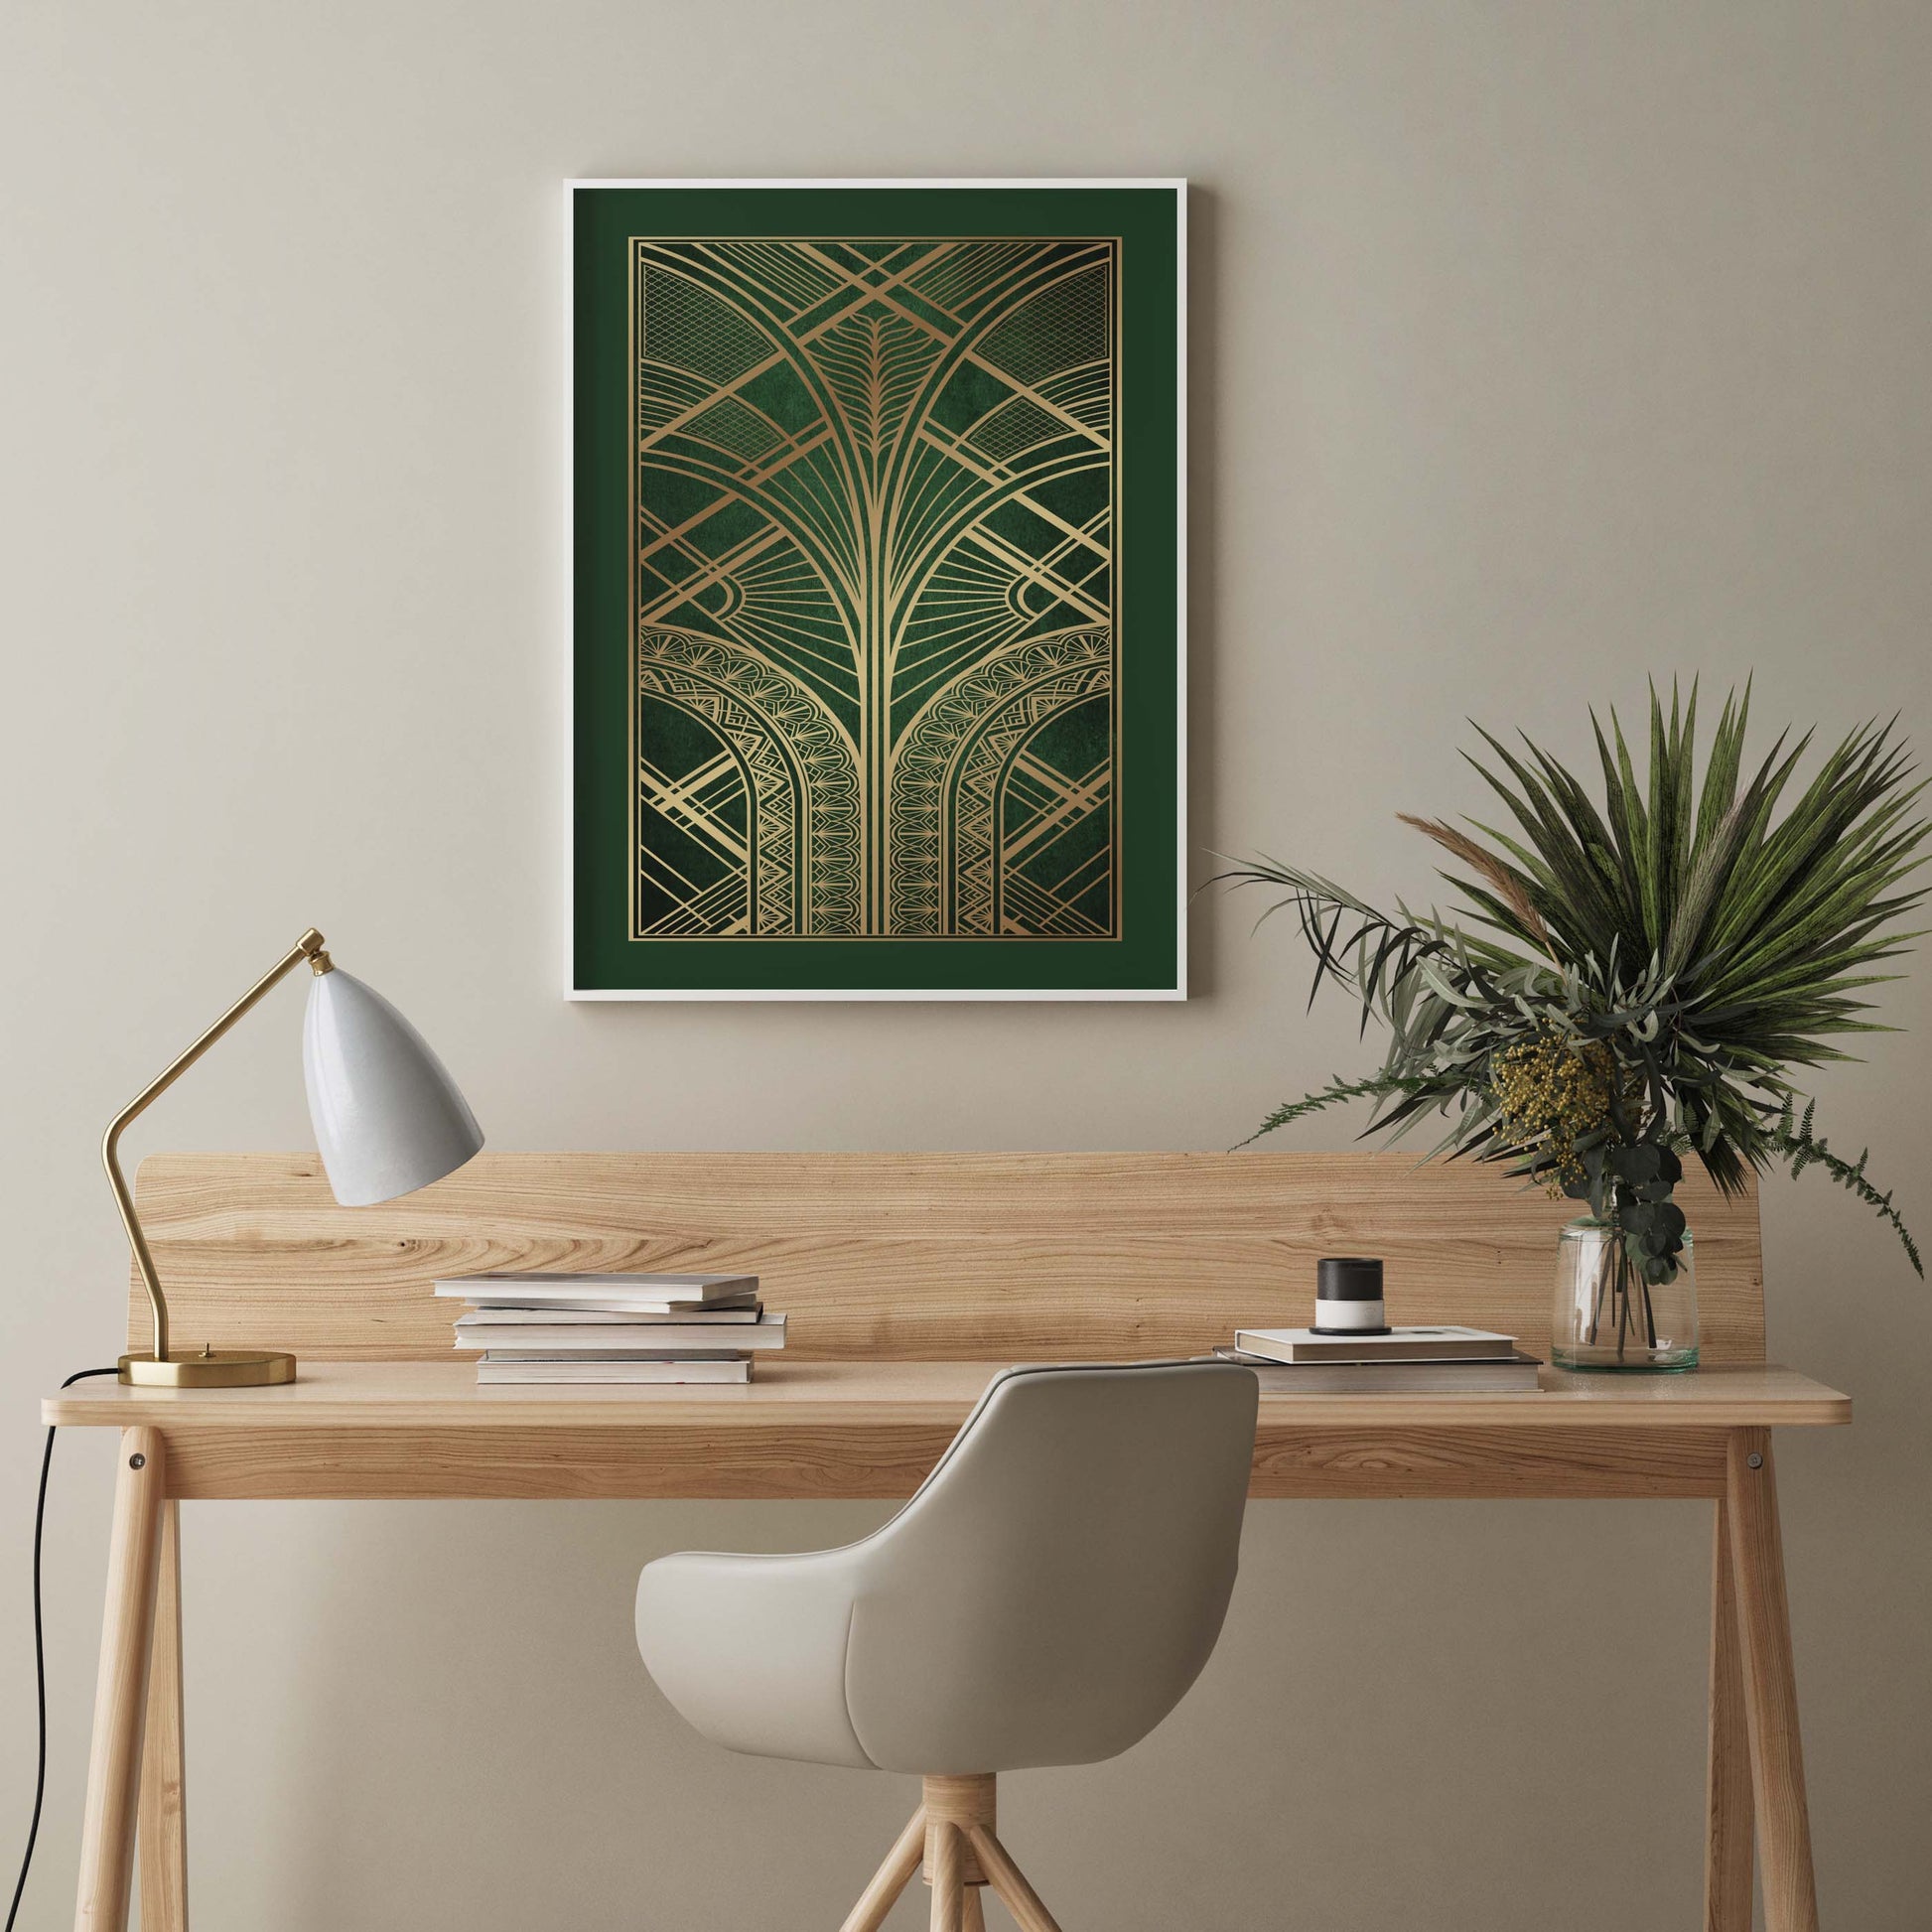 Art deco print with geometric pattern in green and gold